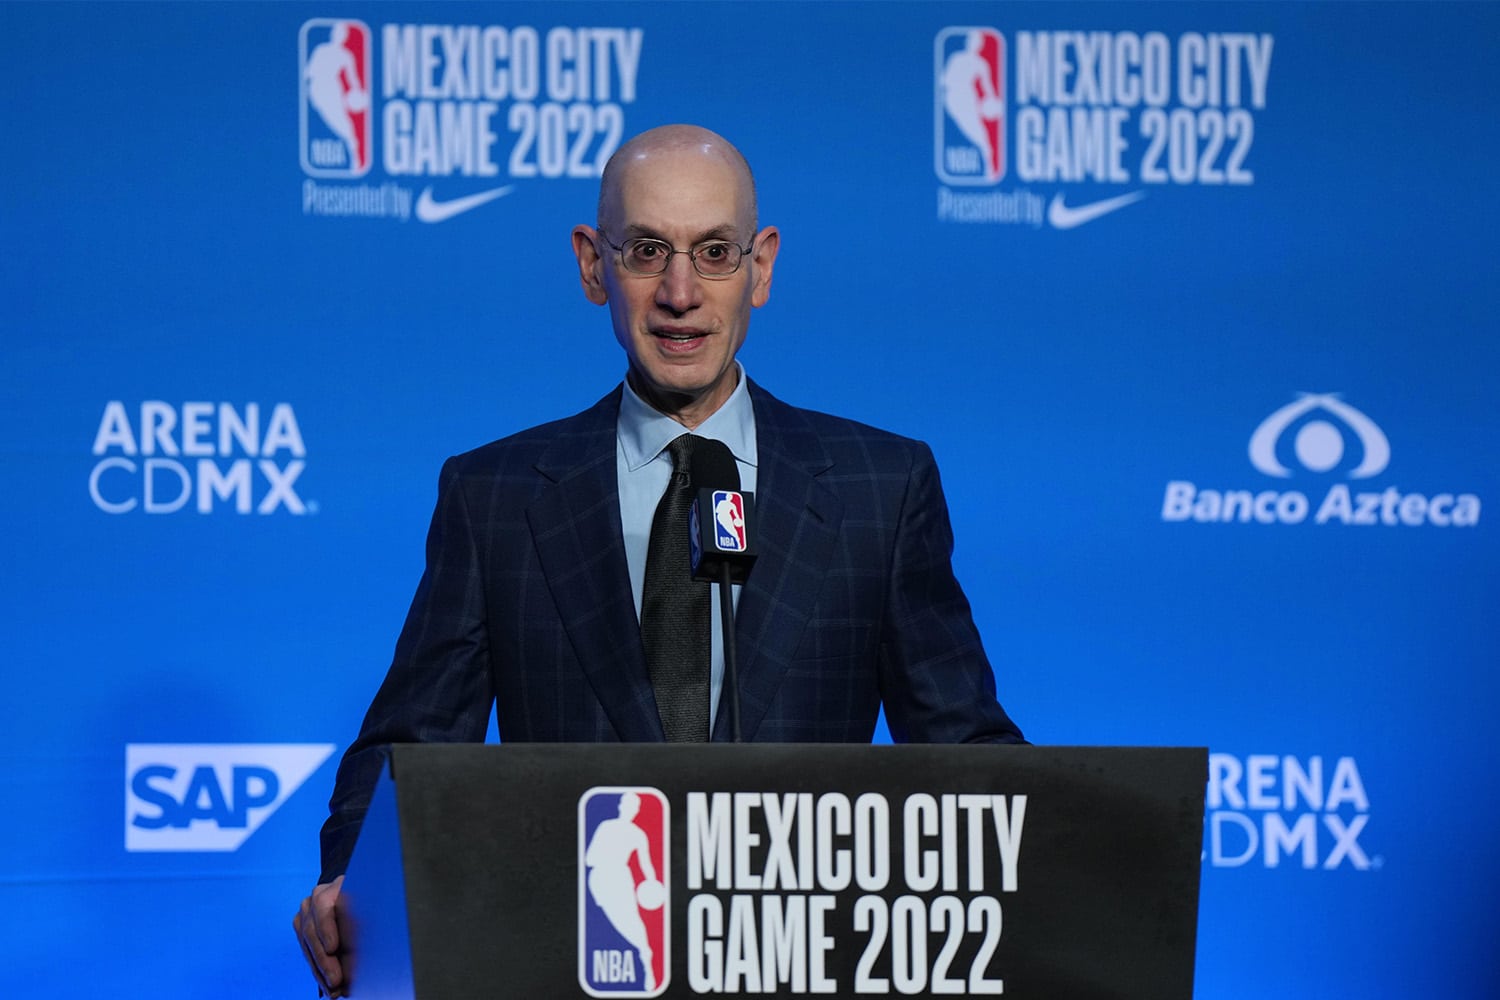 NBA Commissioner Adam Silver speaking at podium ahead of NBA game in Mexico City